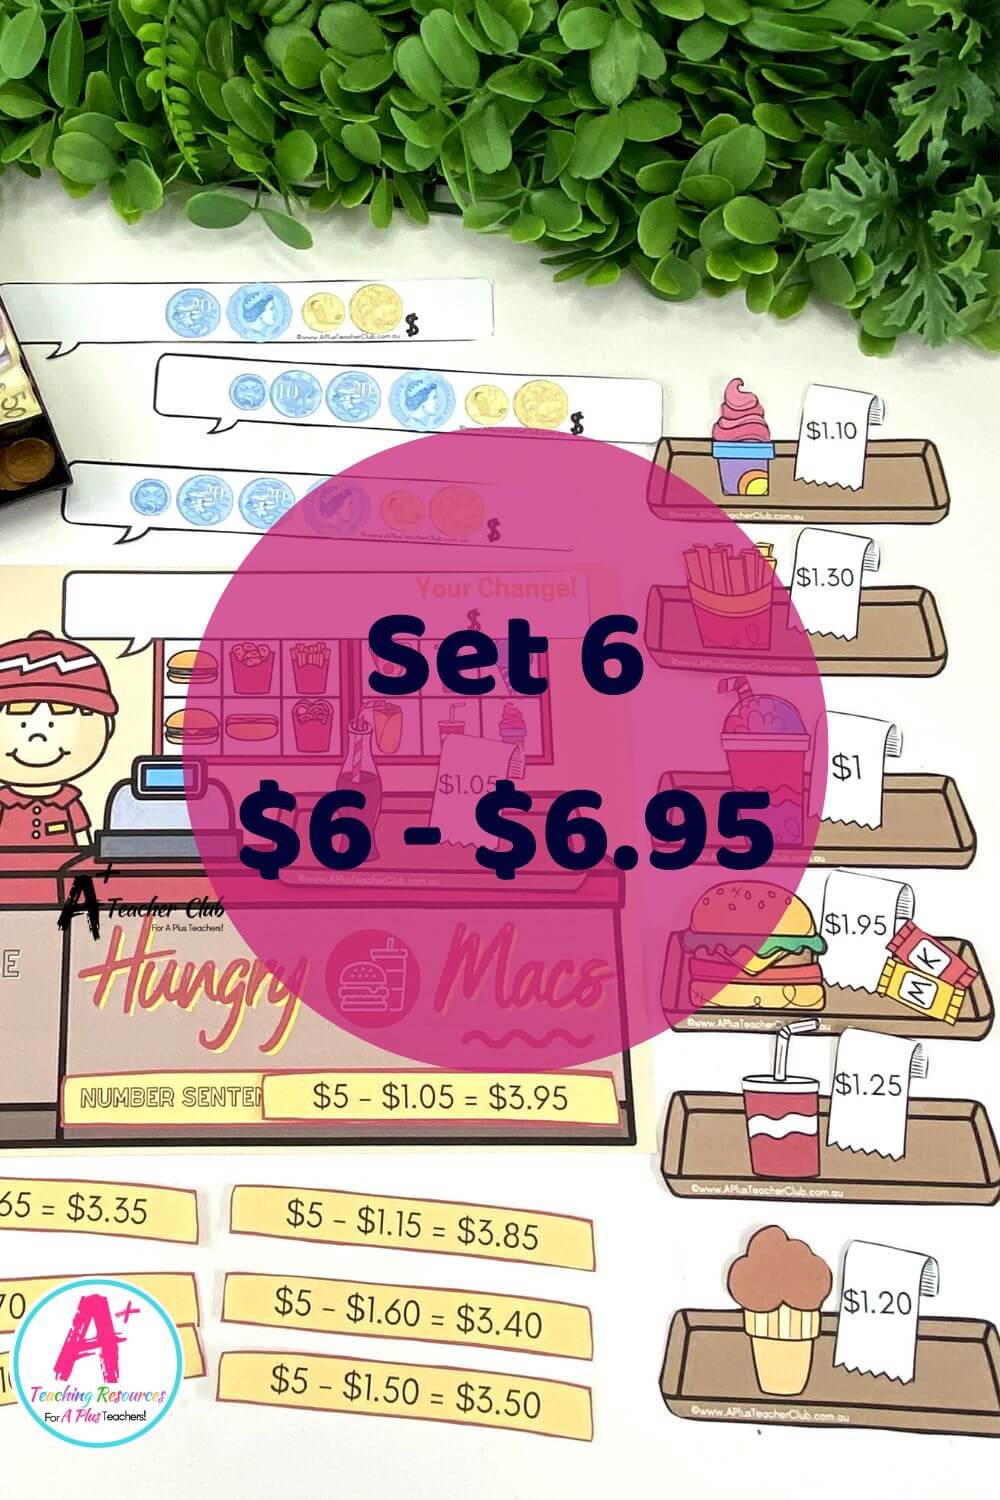 Counting Change Games - Fast Food Set 6 ($6-$6.95)